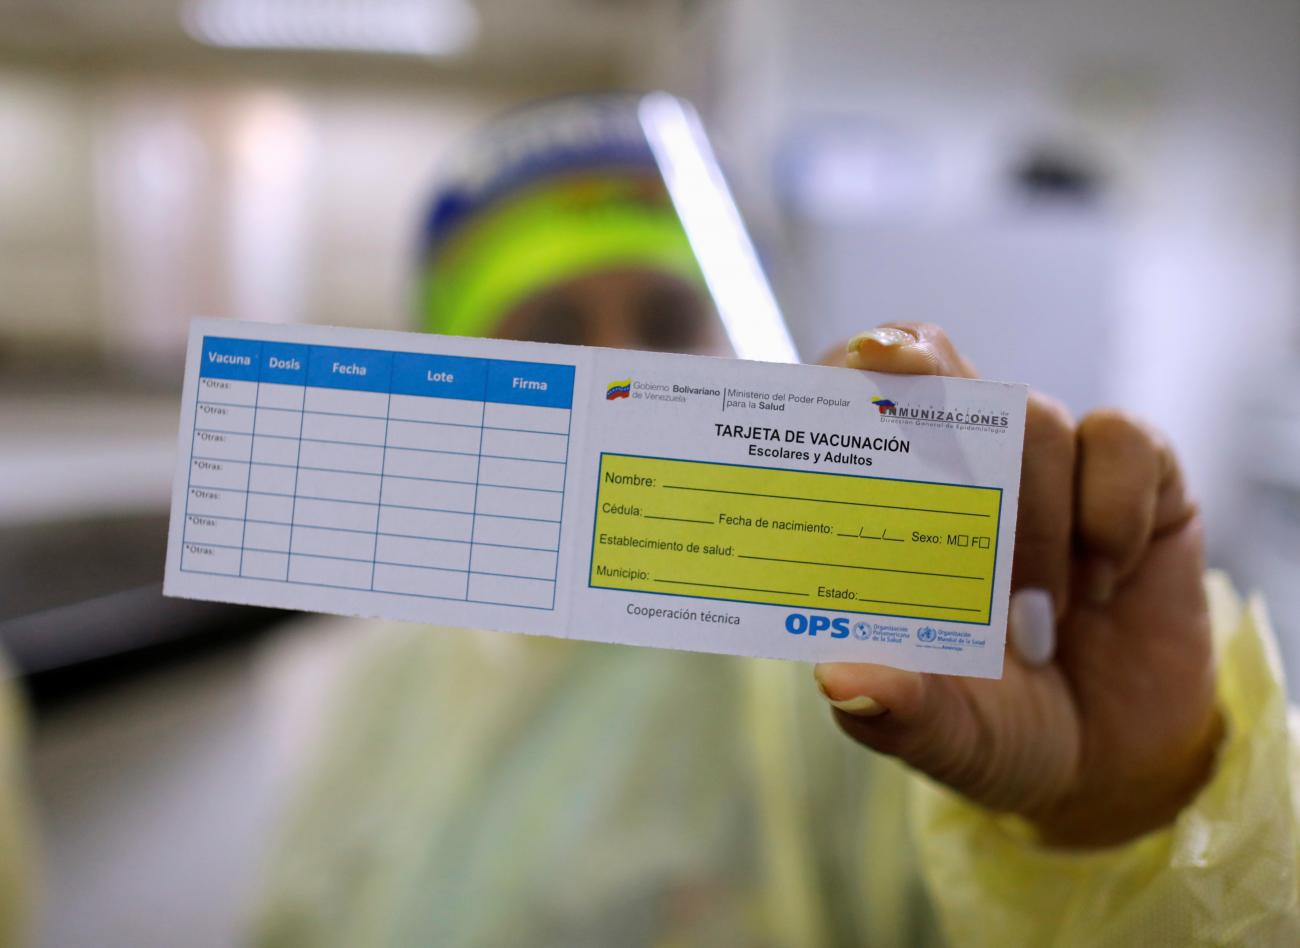 A Venezuelan health worker shows a vaccination card for school children and adults as health workers are being vaccinated with Russia's Sputnik V vaccine against the coronavirus disease (COVID-19, at a hospital, in Caracas, Venezuela February 22, 2021. 